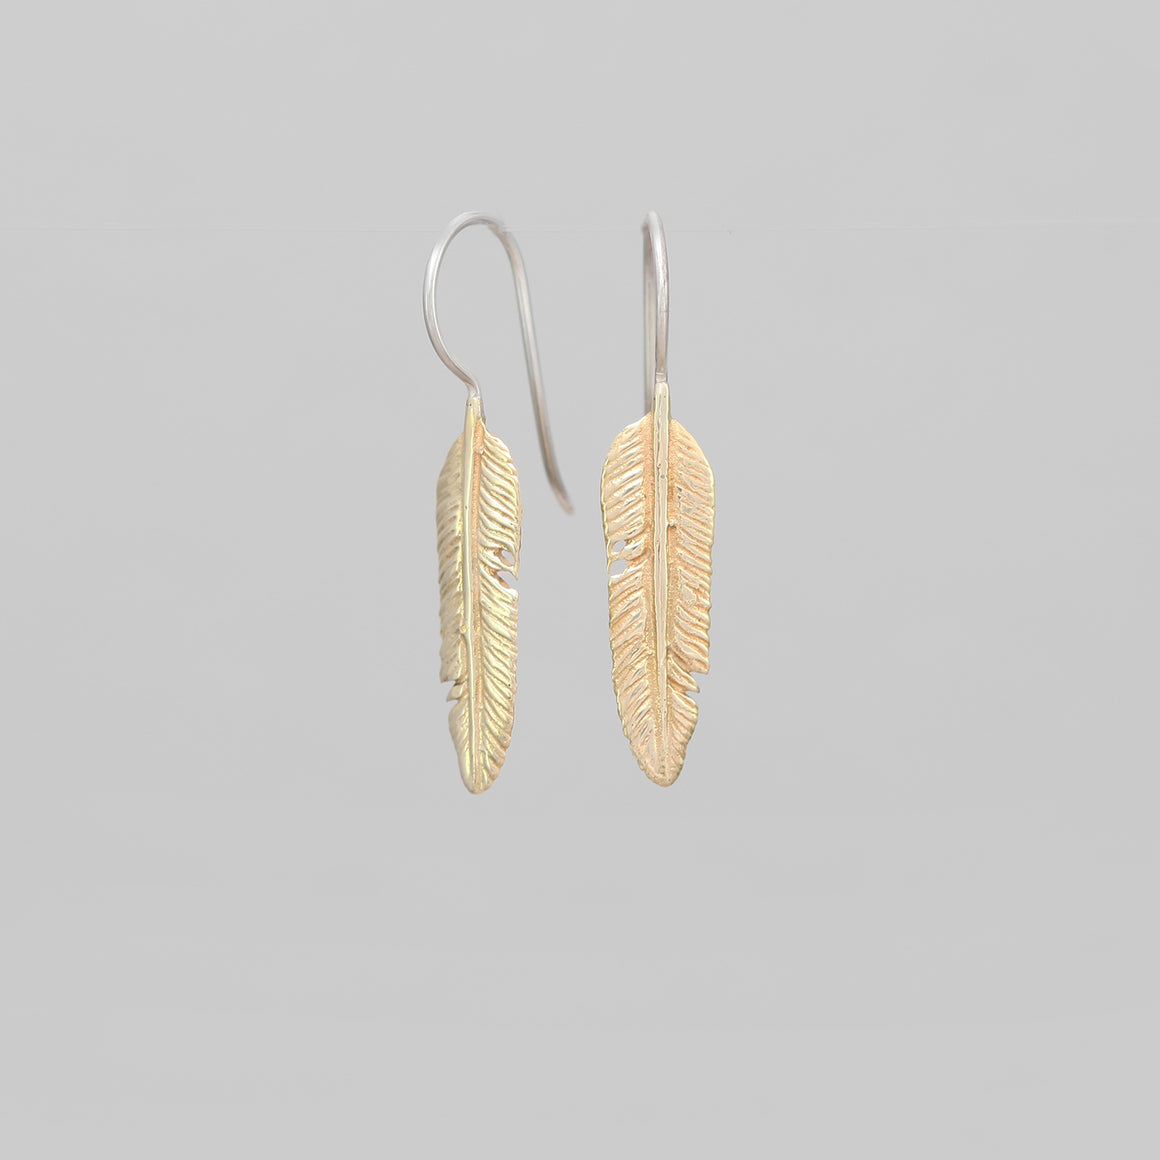 SMALL YELLOW BRASS FEATHER DROP EARRINGS